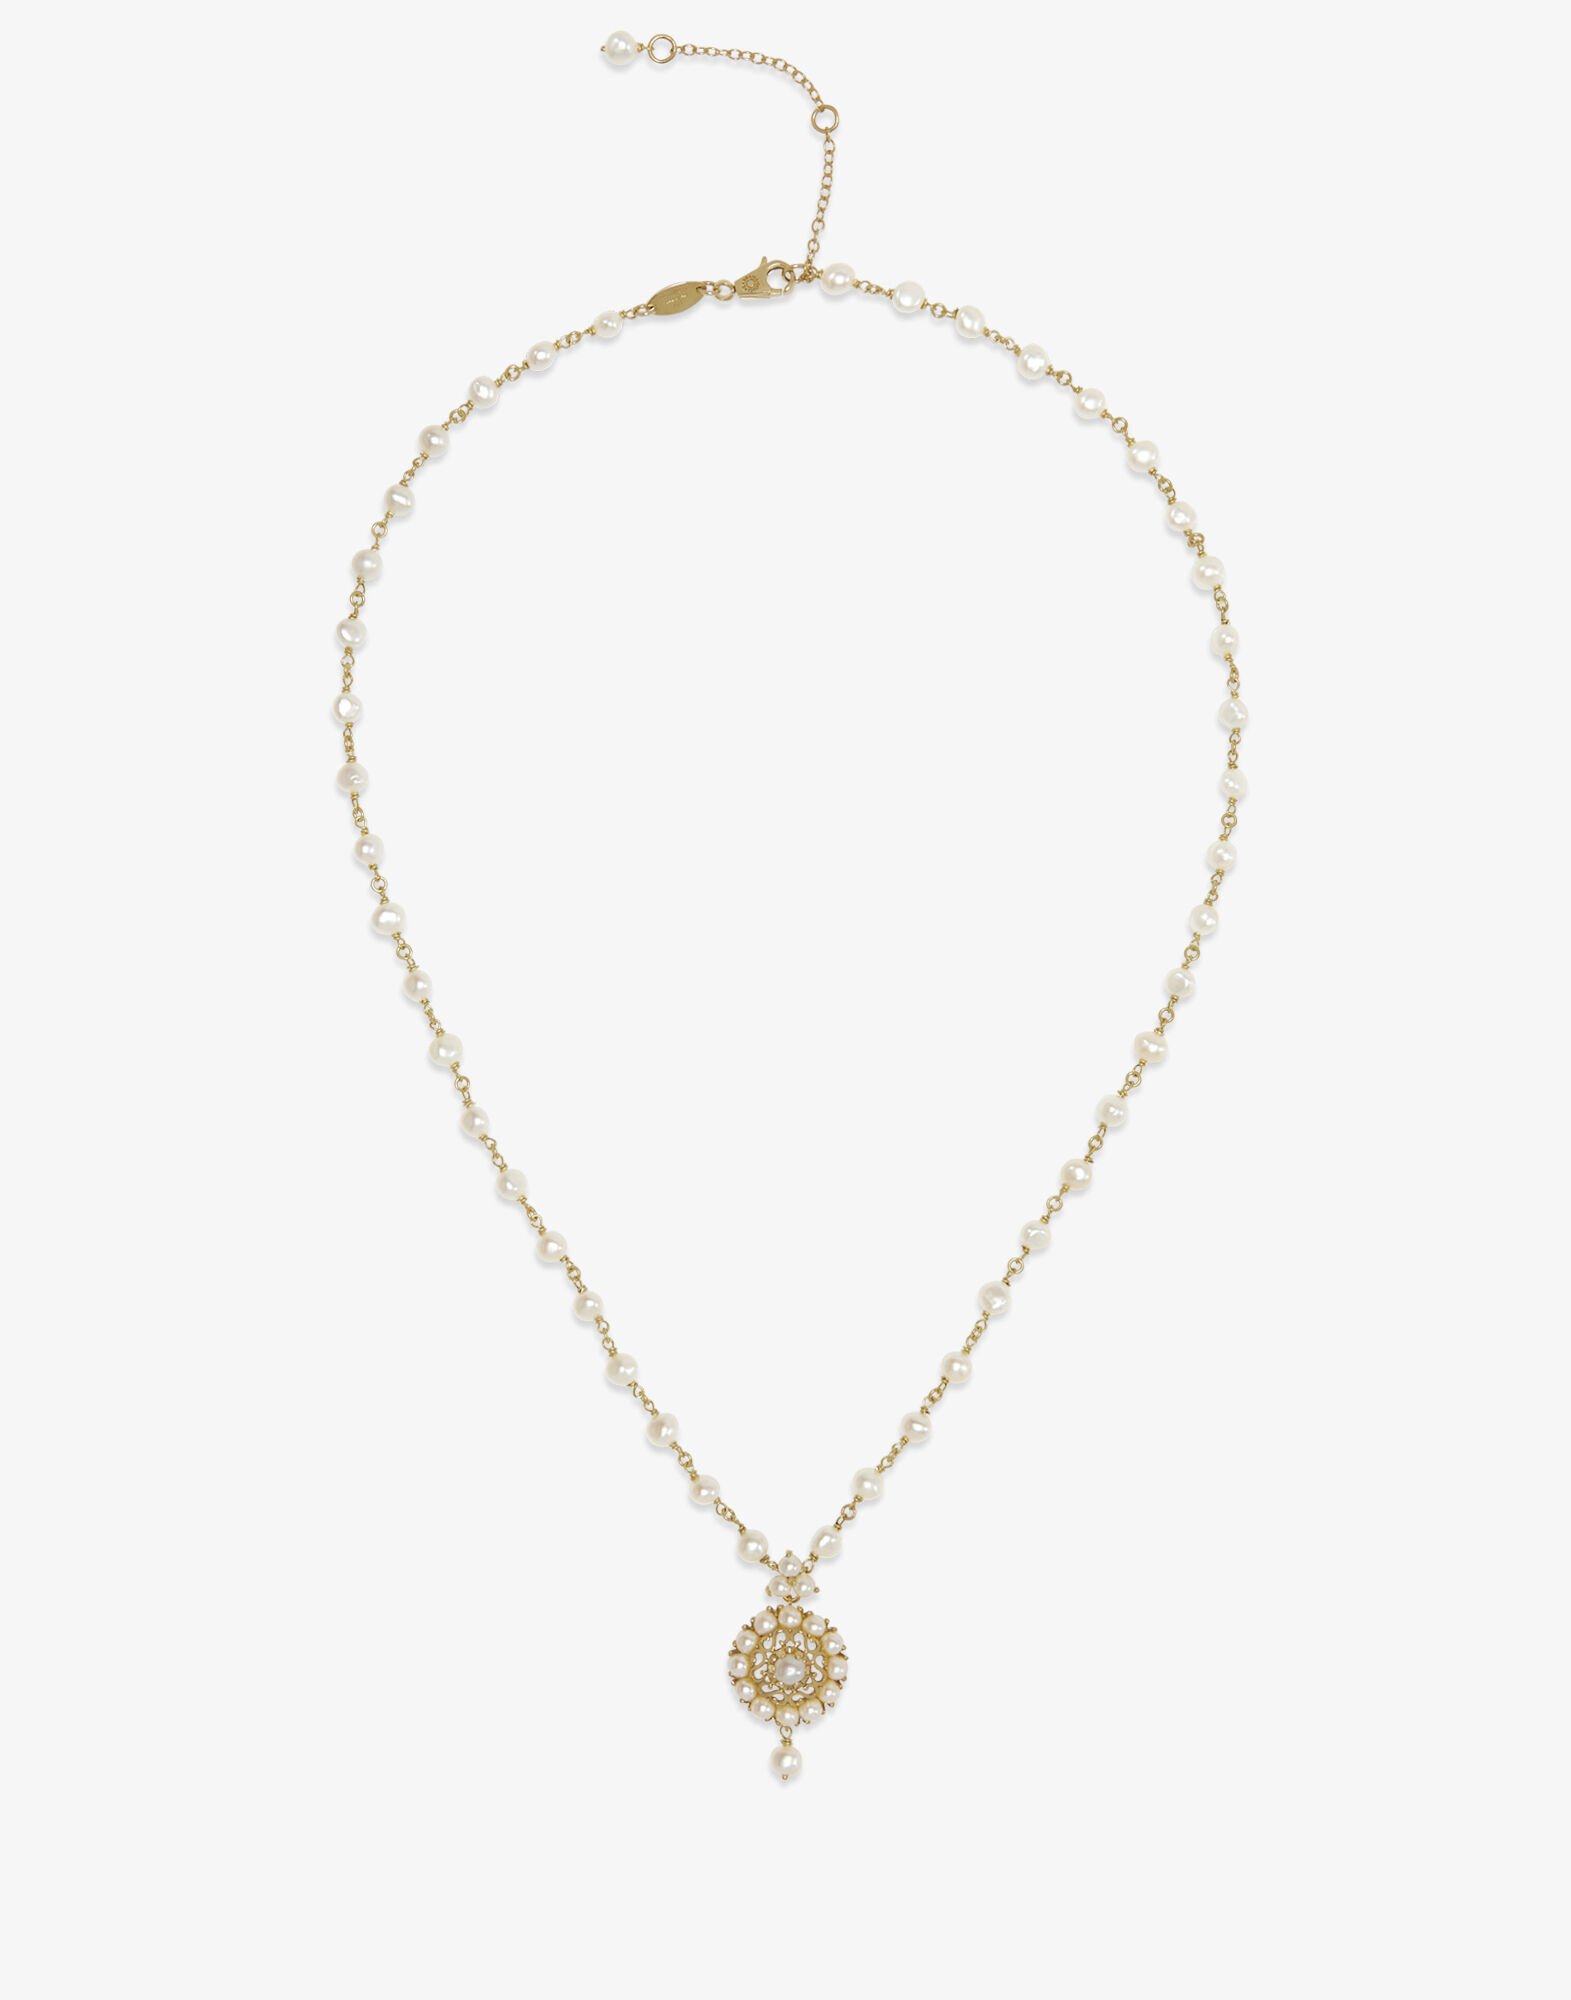 Dolce & Gabbana Romance necklace in yellow gold with pearls Black WWJC2SXCMDT